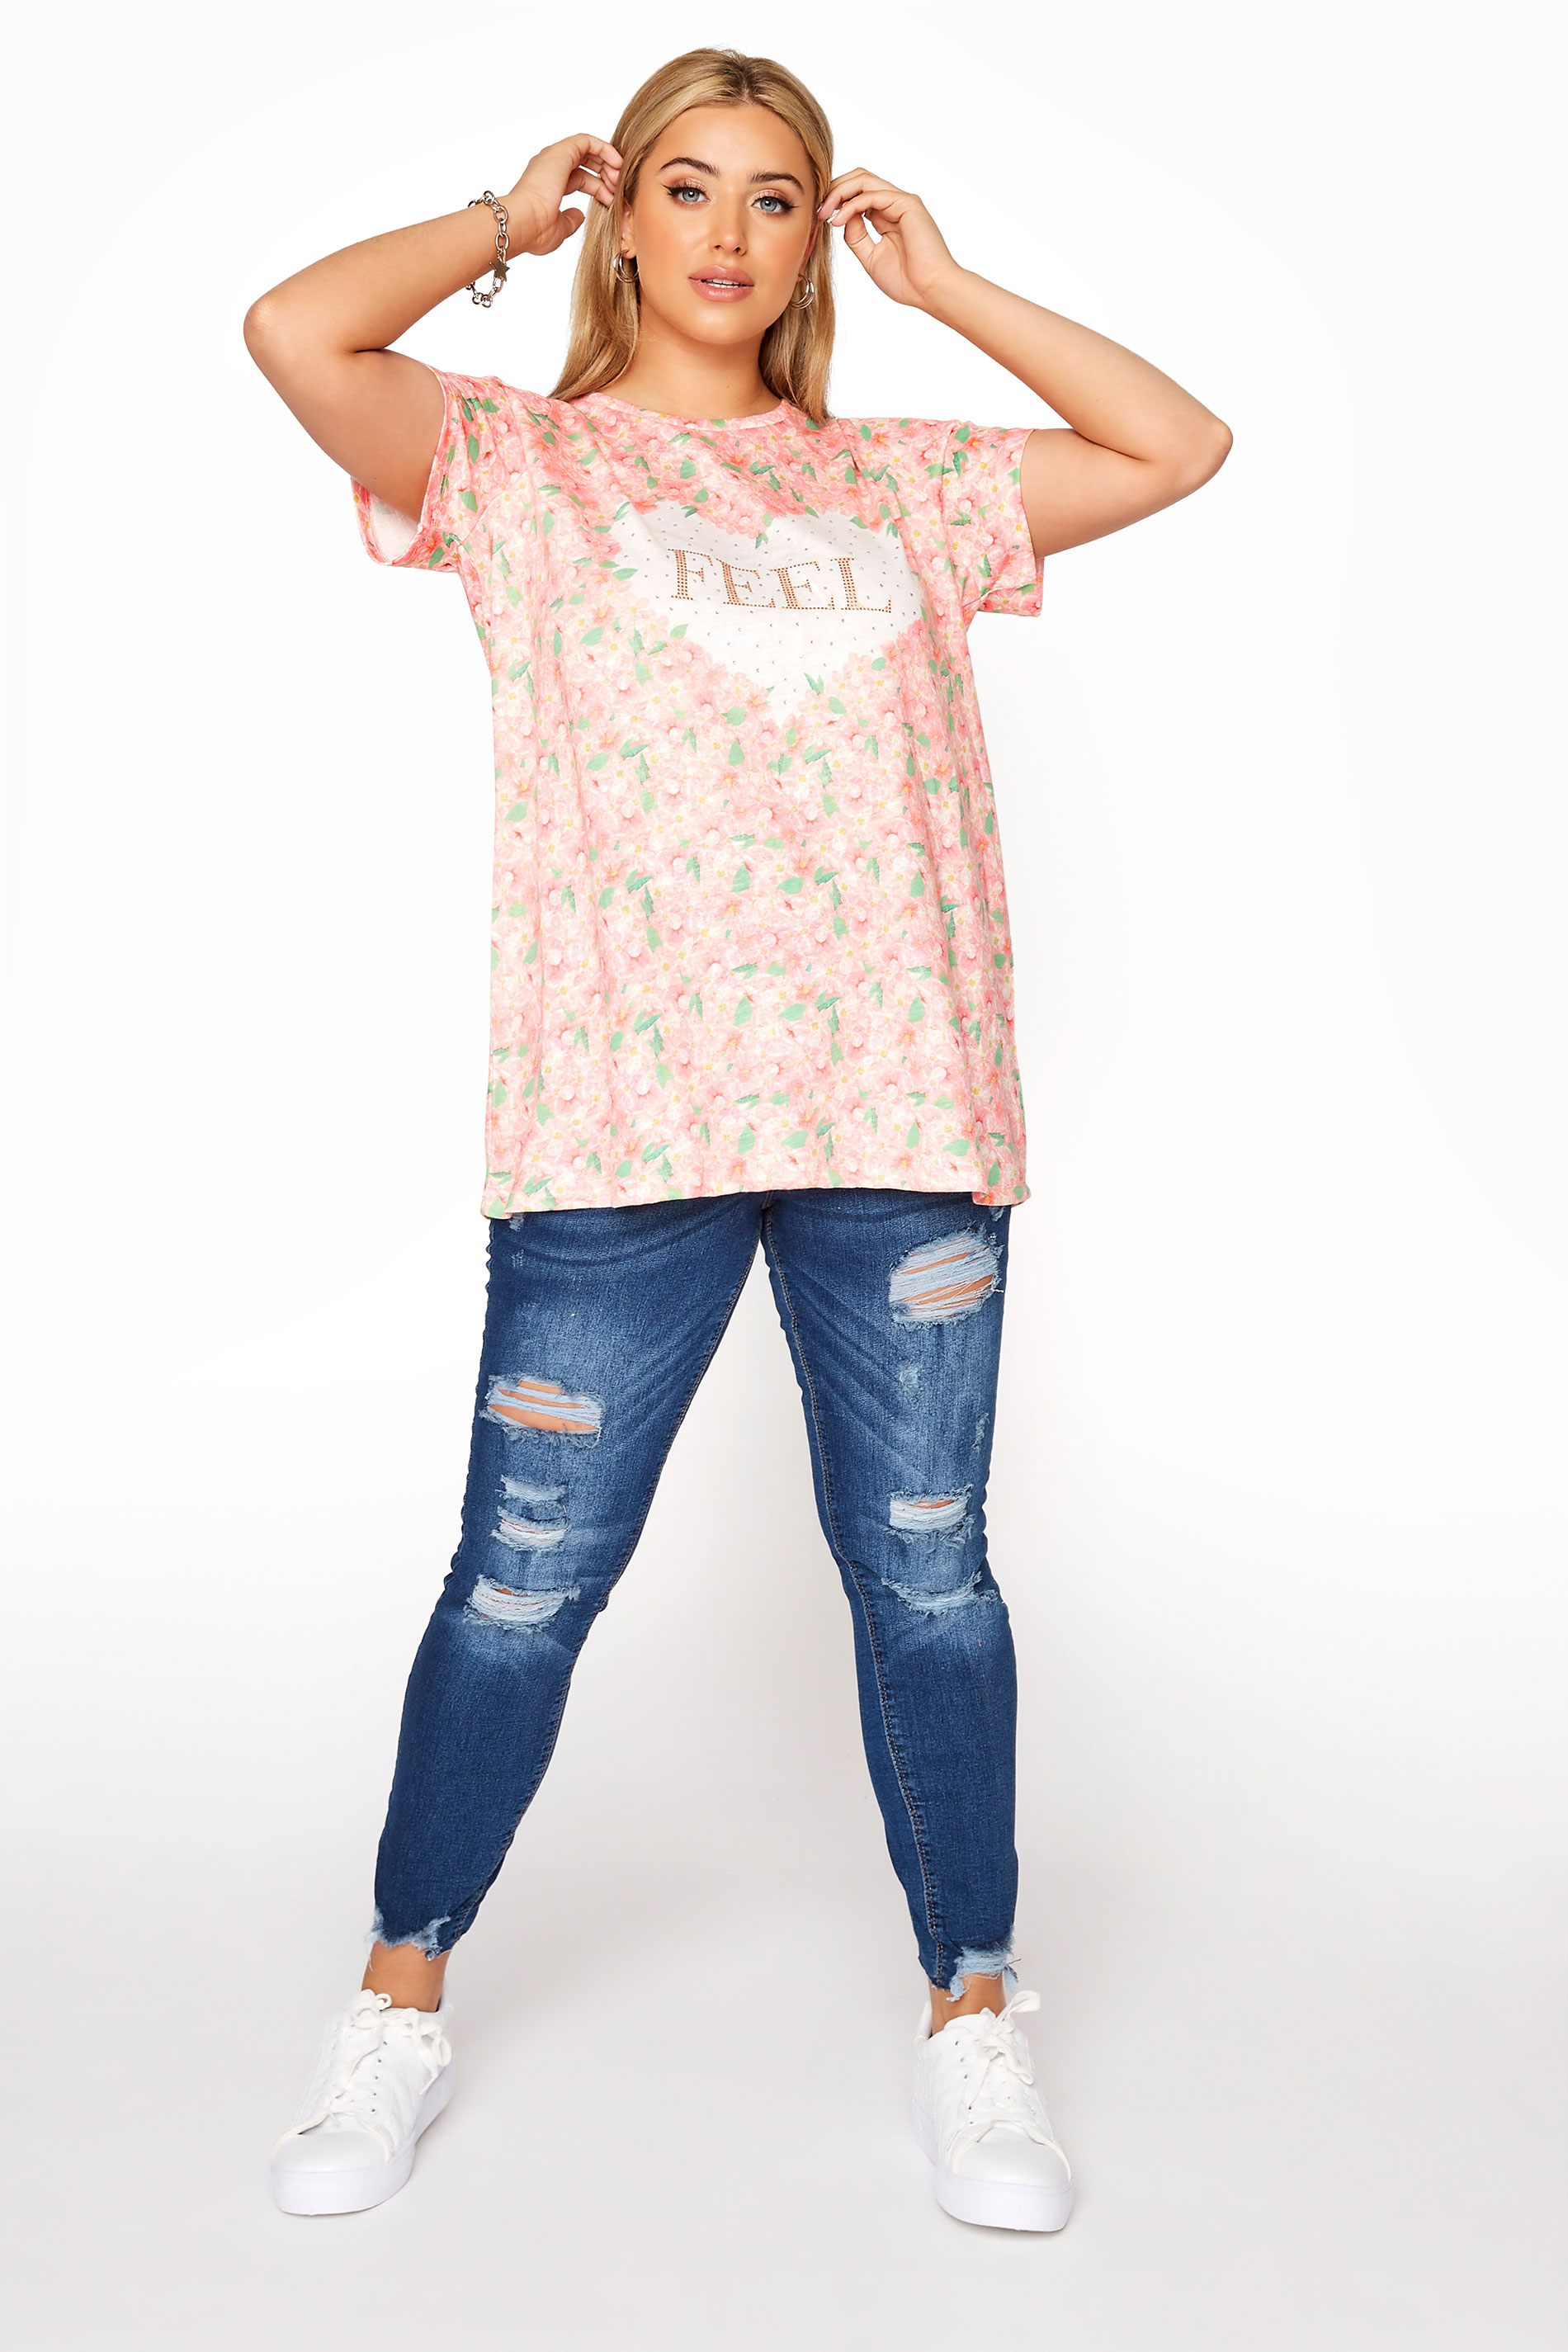 Grande taille  Tops Grande taille  T-Shirts | T-Shirt Rose Floral Coeur 'Feel' - KW56023